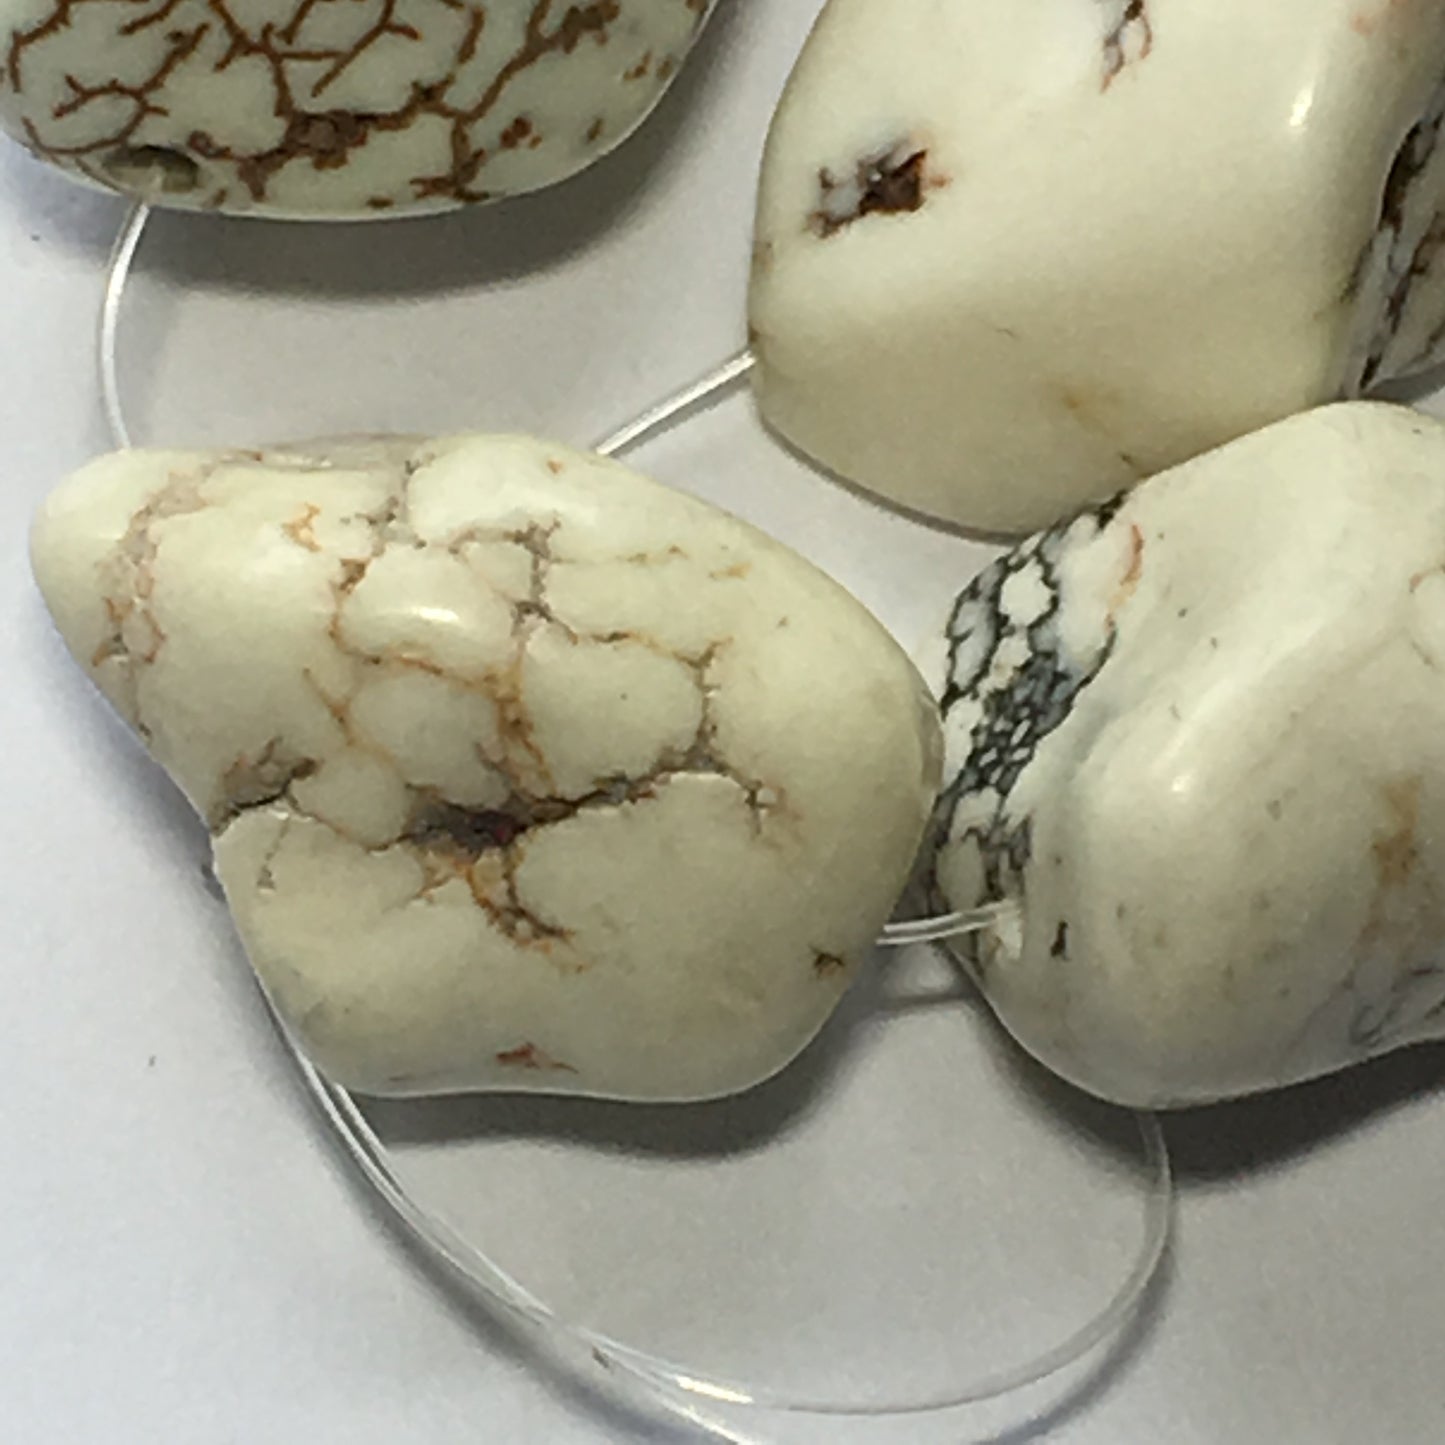 Ivory Howlite Large Nugget Beads 6 Beads 15-25 mm